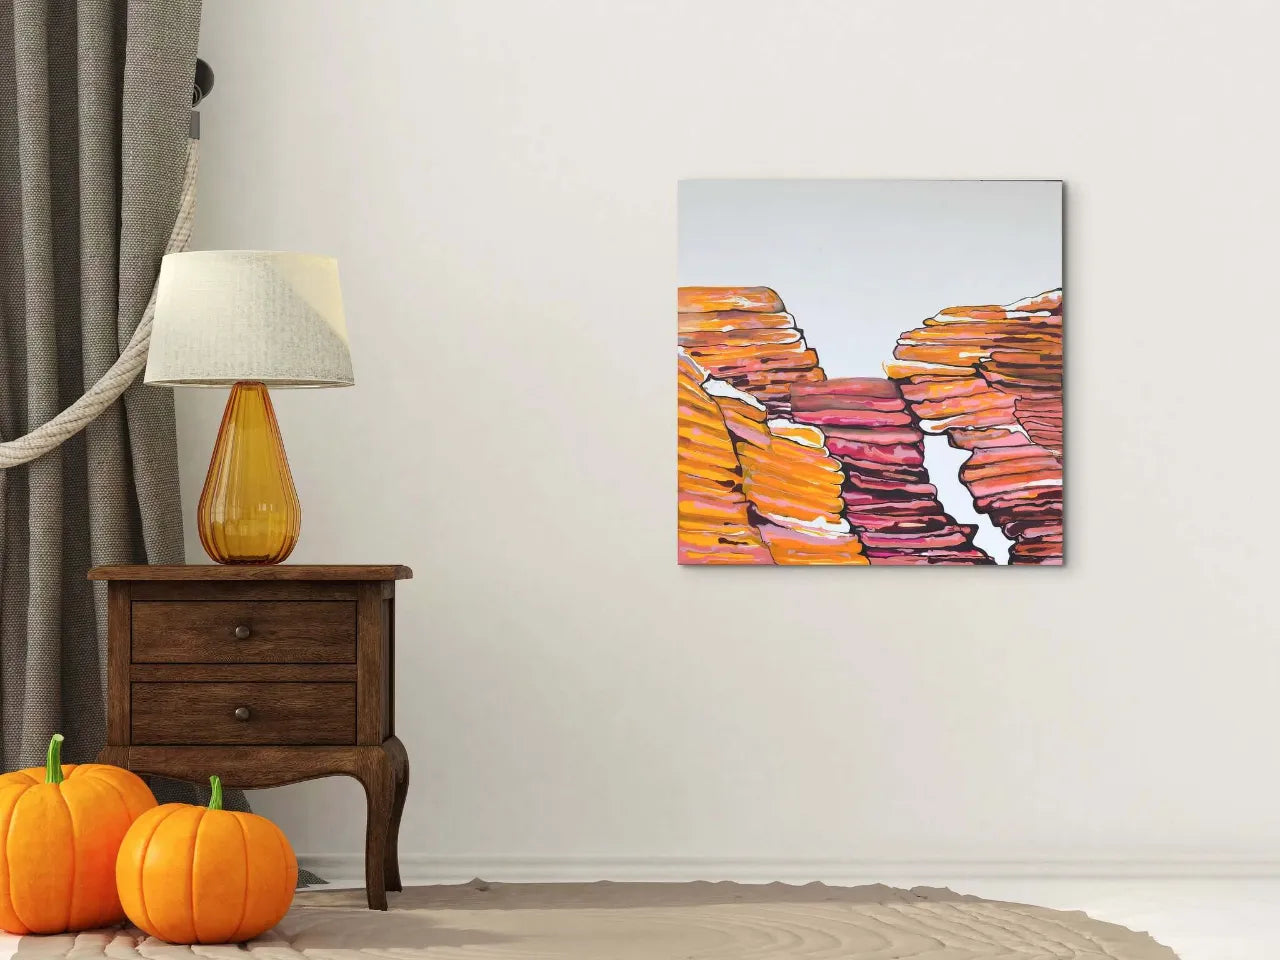 Abstract-Artwork-by-Sung-Lee-Pancake-Rocks-Original-Painting-on-canvas